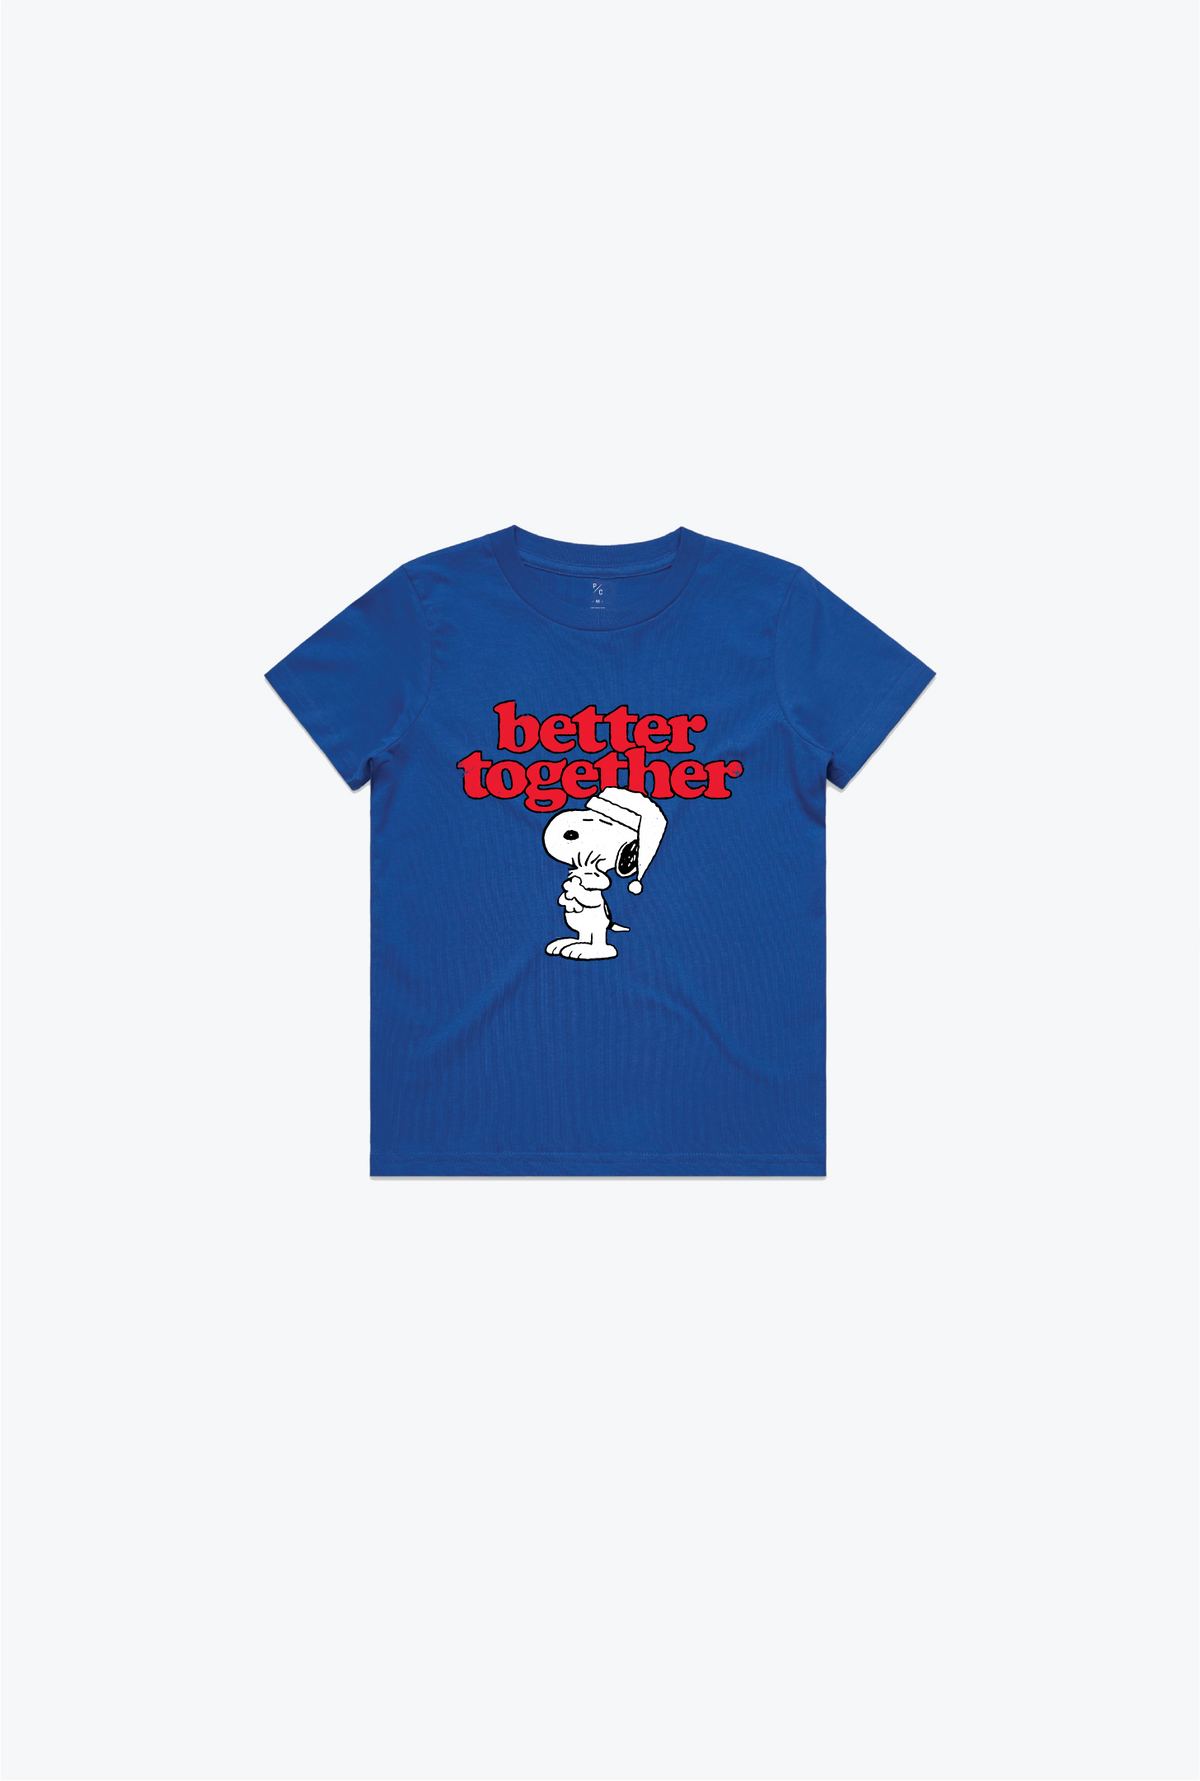 P/C x Peanuts Snoopy Better Together Kids T-Shirt - Royal